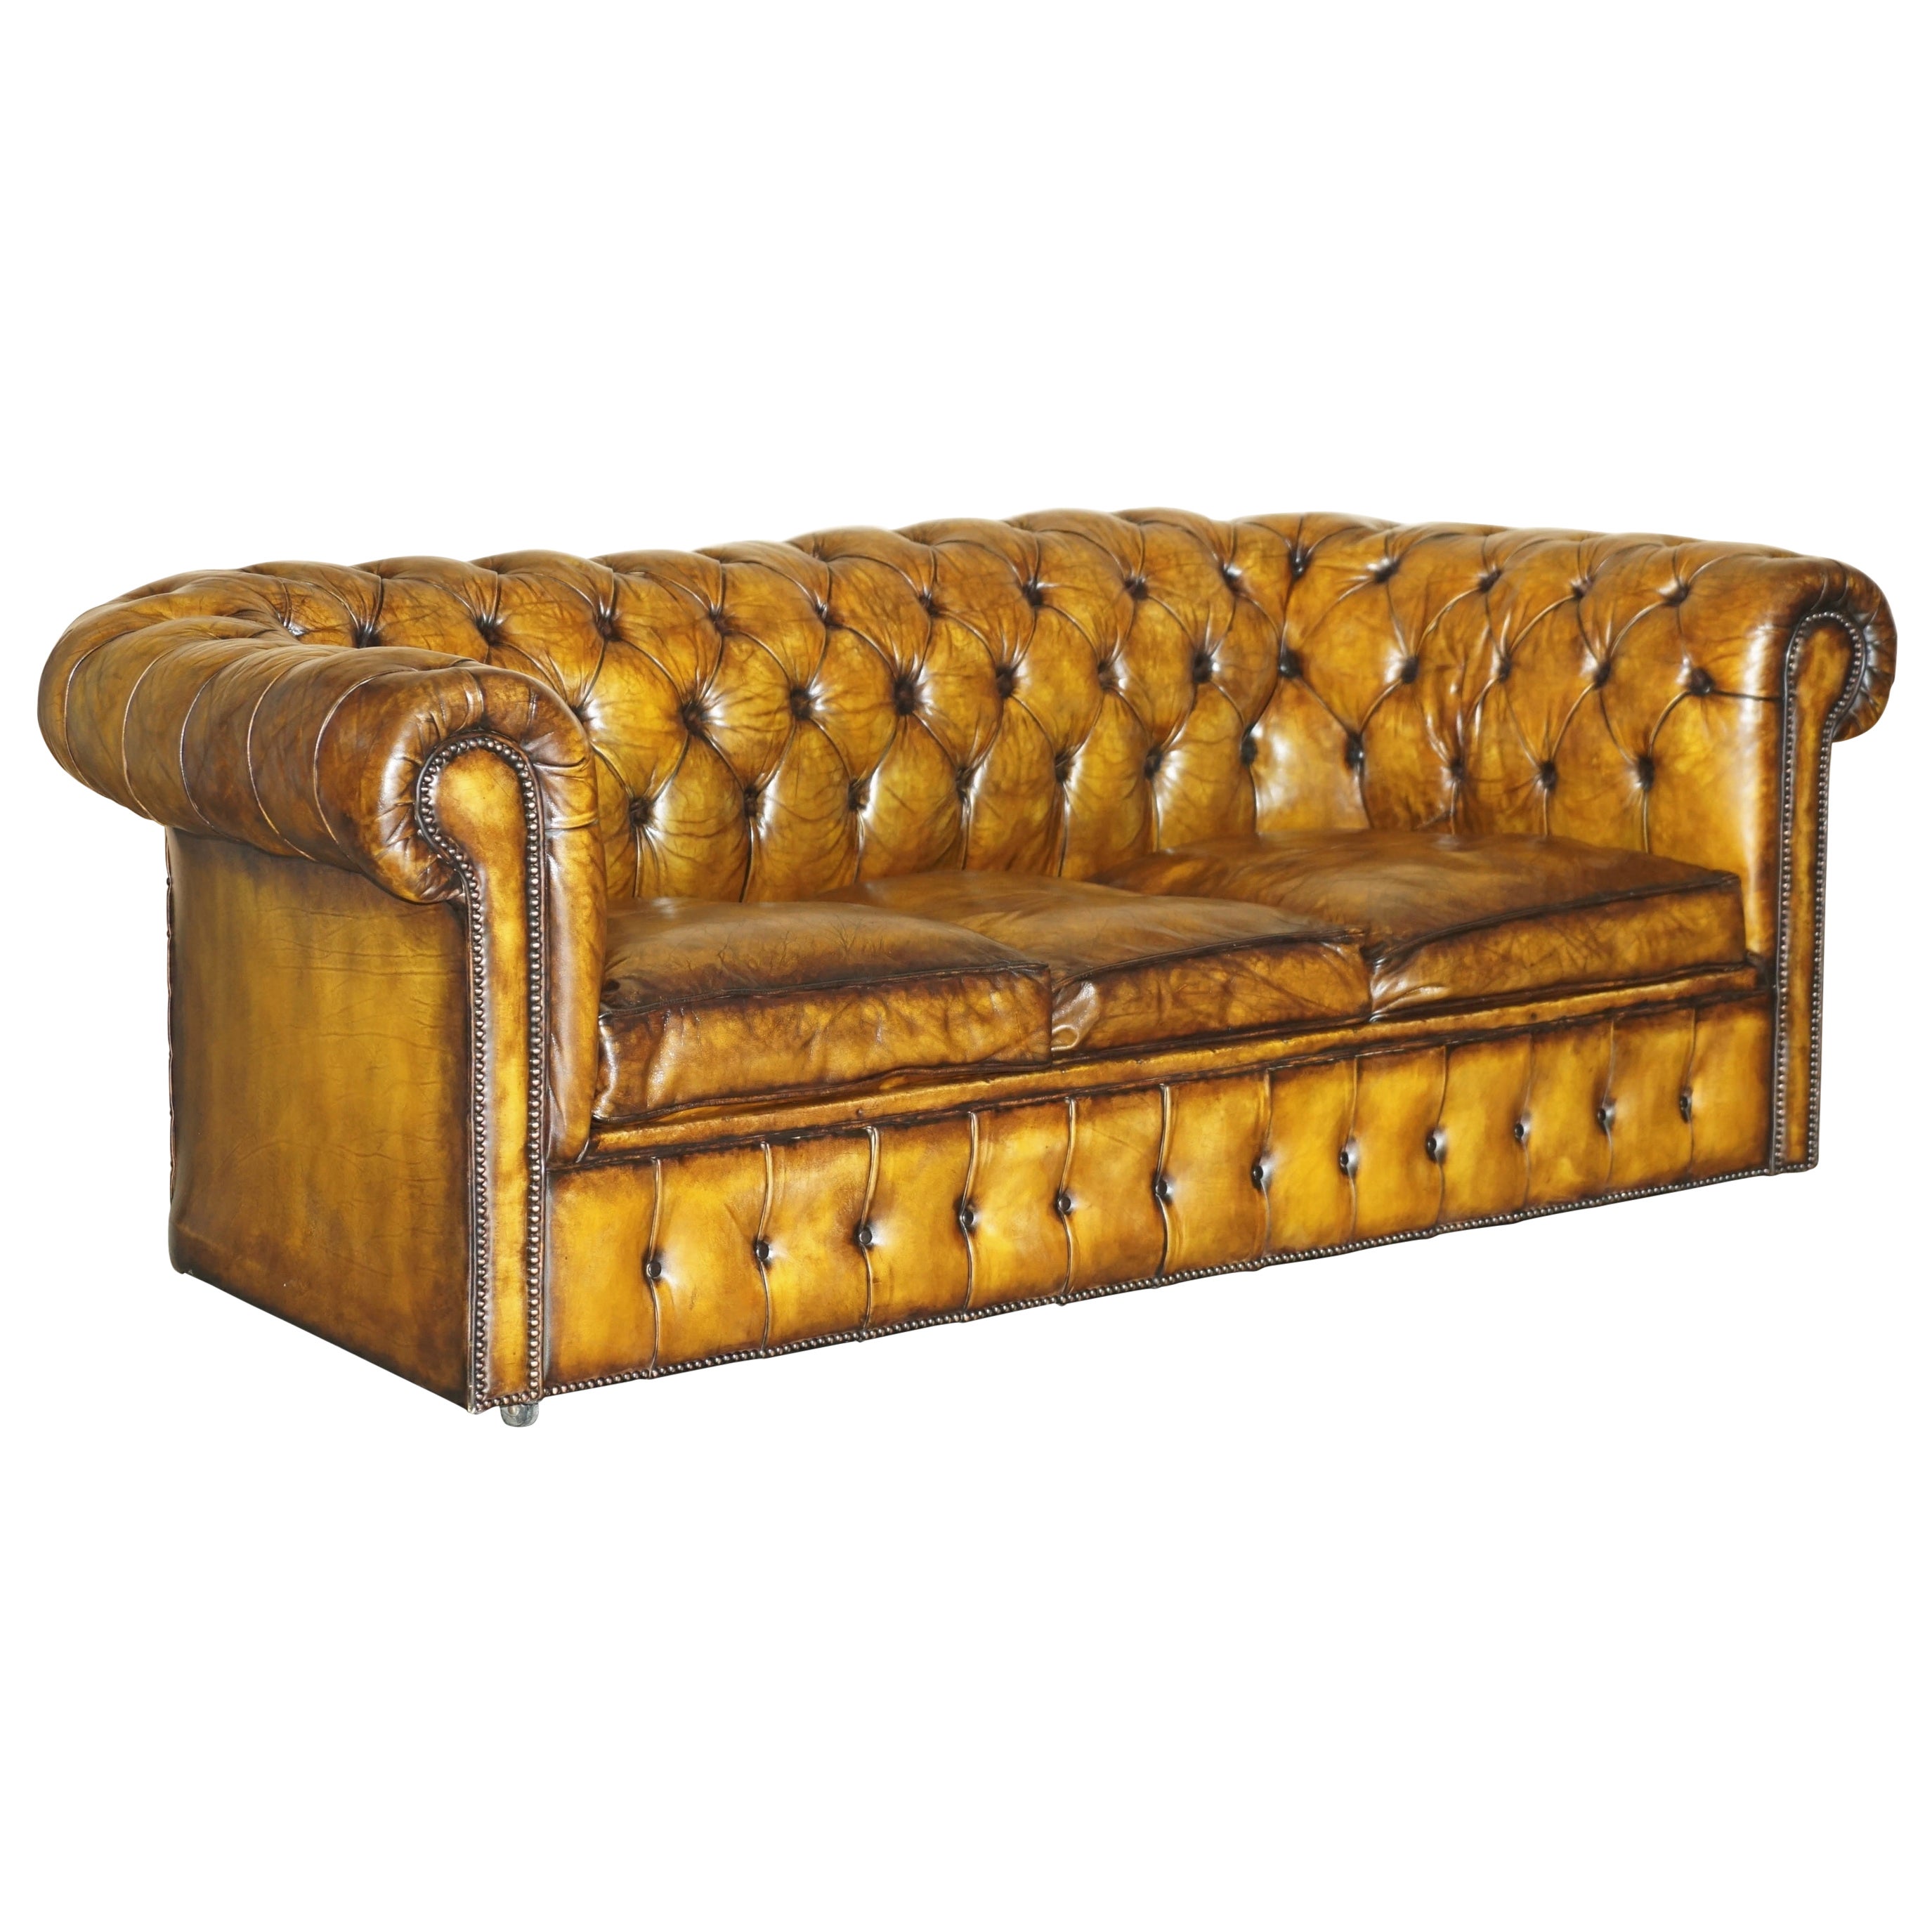 SUPER RARE FULLY RESTORED VINTAGE CIGAR BROWN LEATHER CHESTERFiELD SOFA BED For Sale